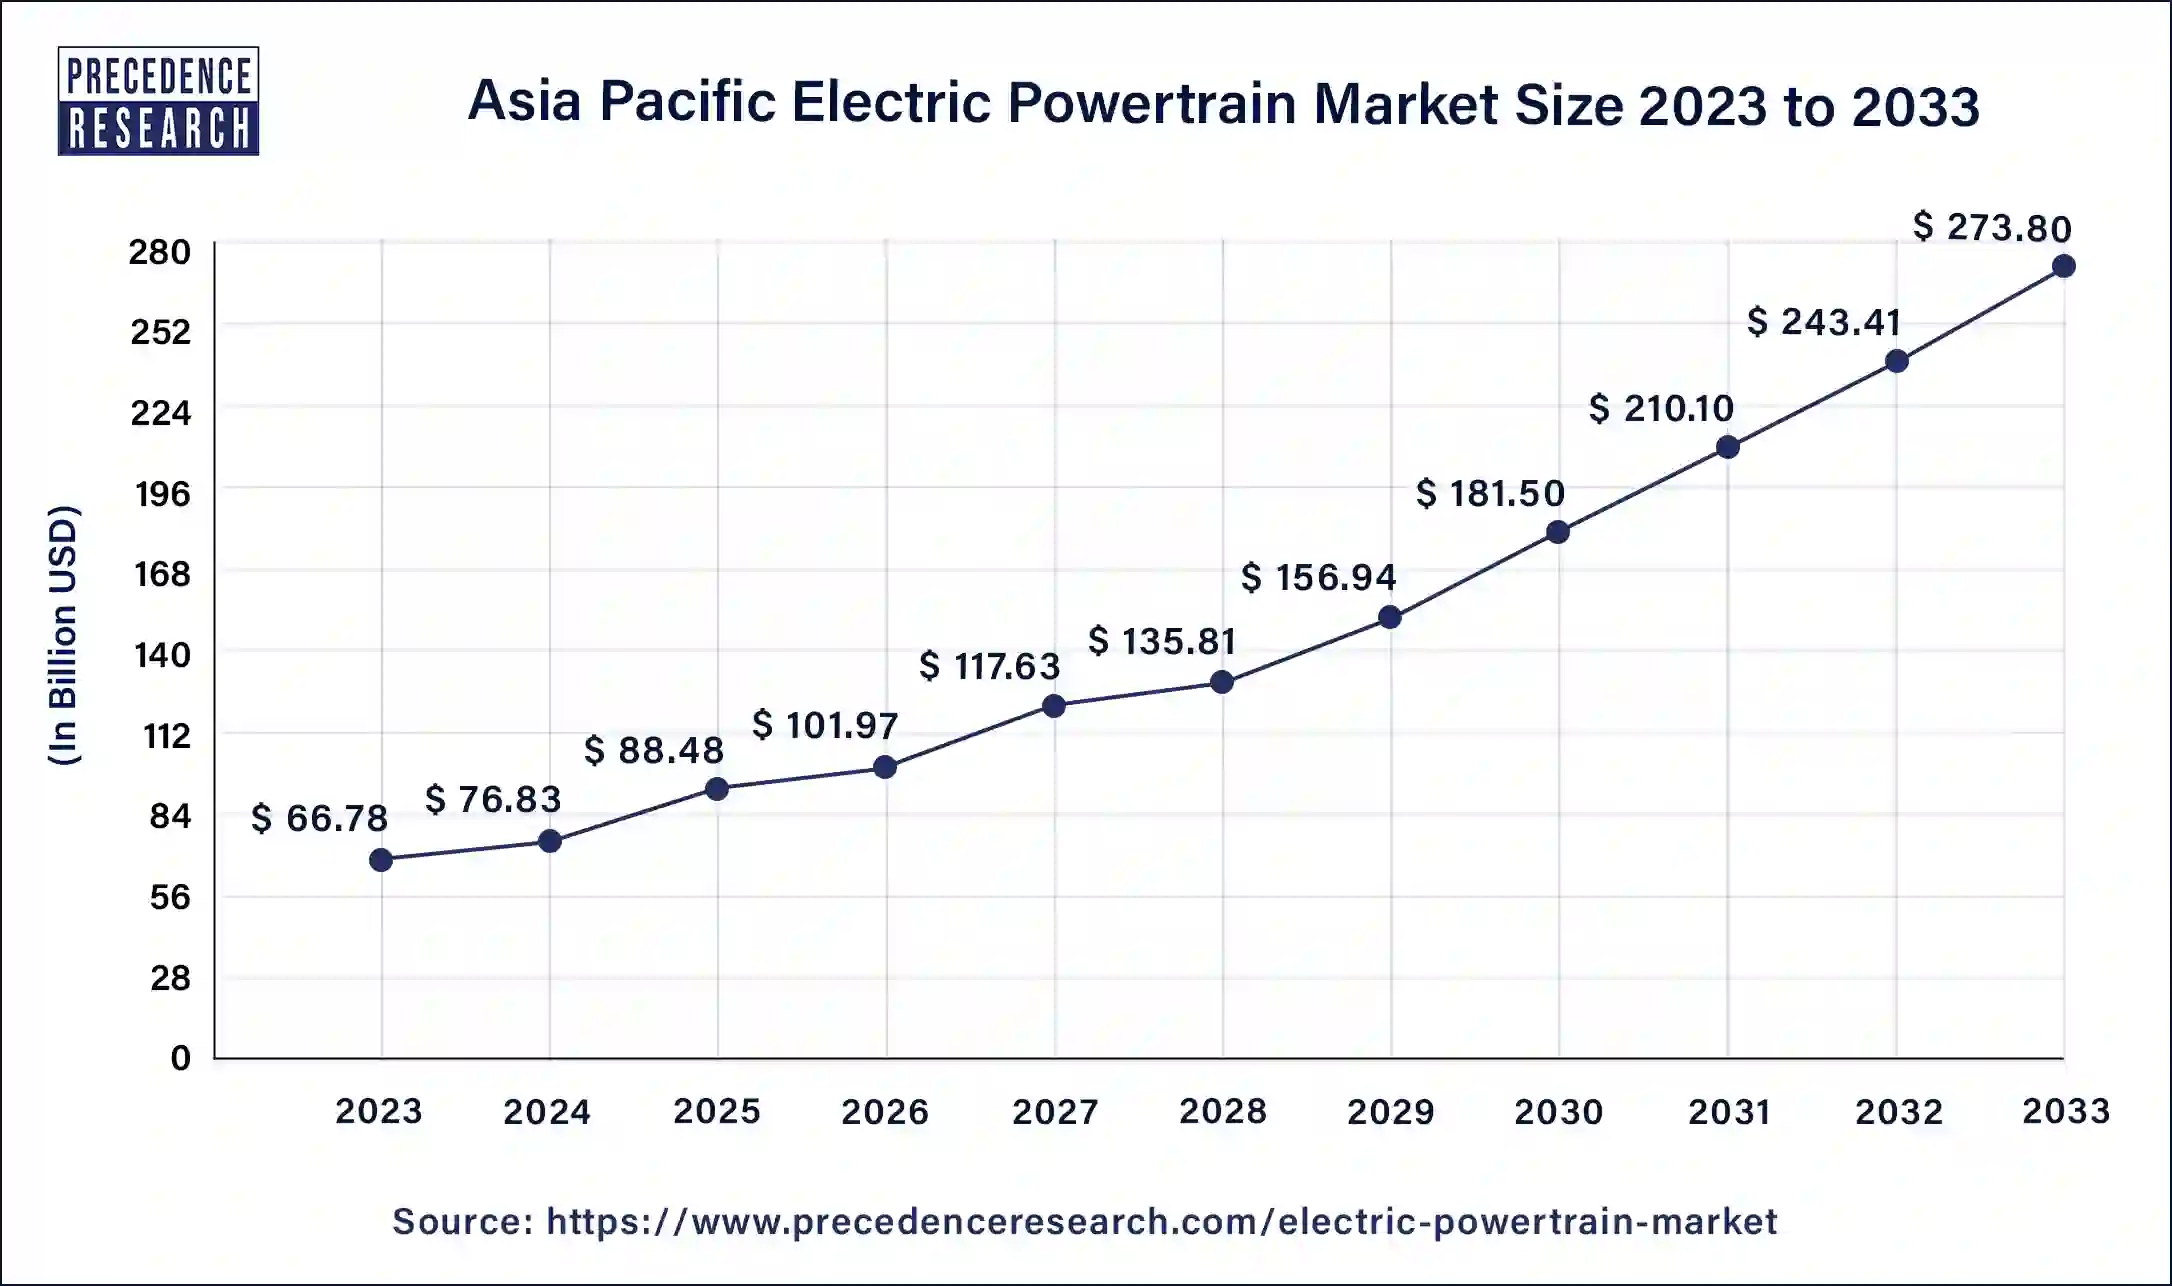 Asia Pacific Electric Powertrain Market Size 2024 to 2033